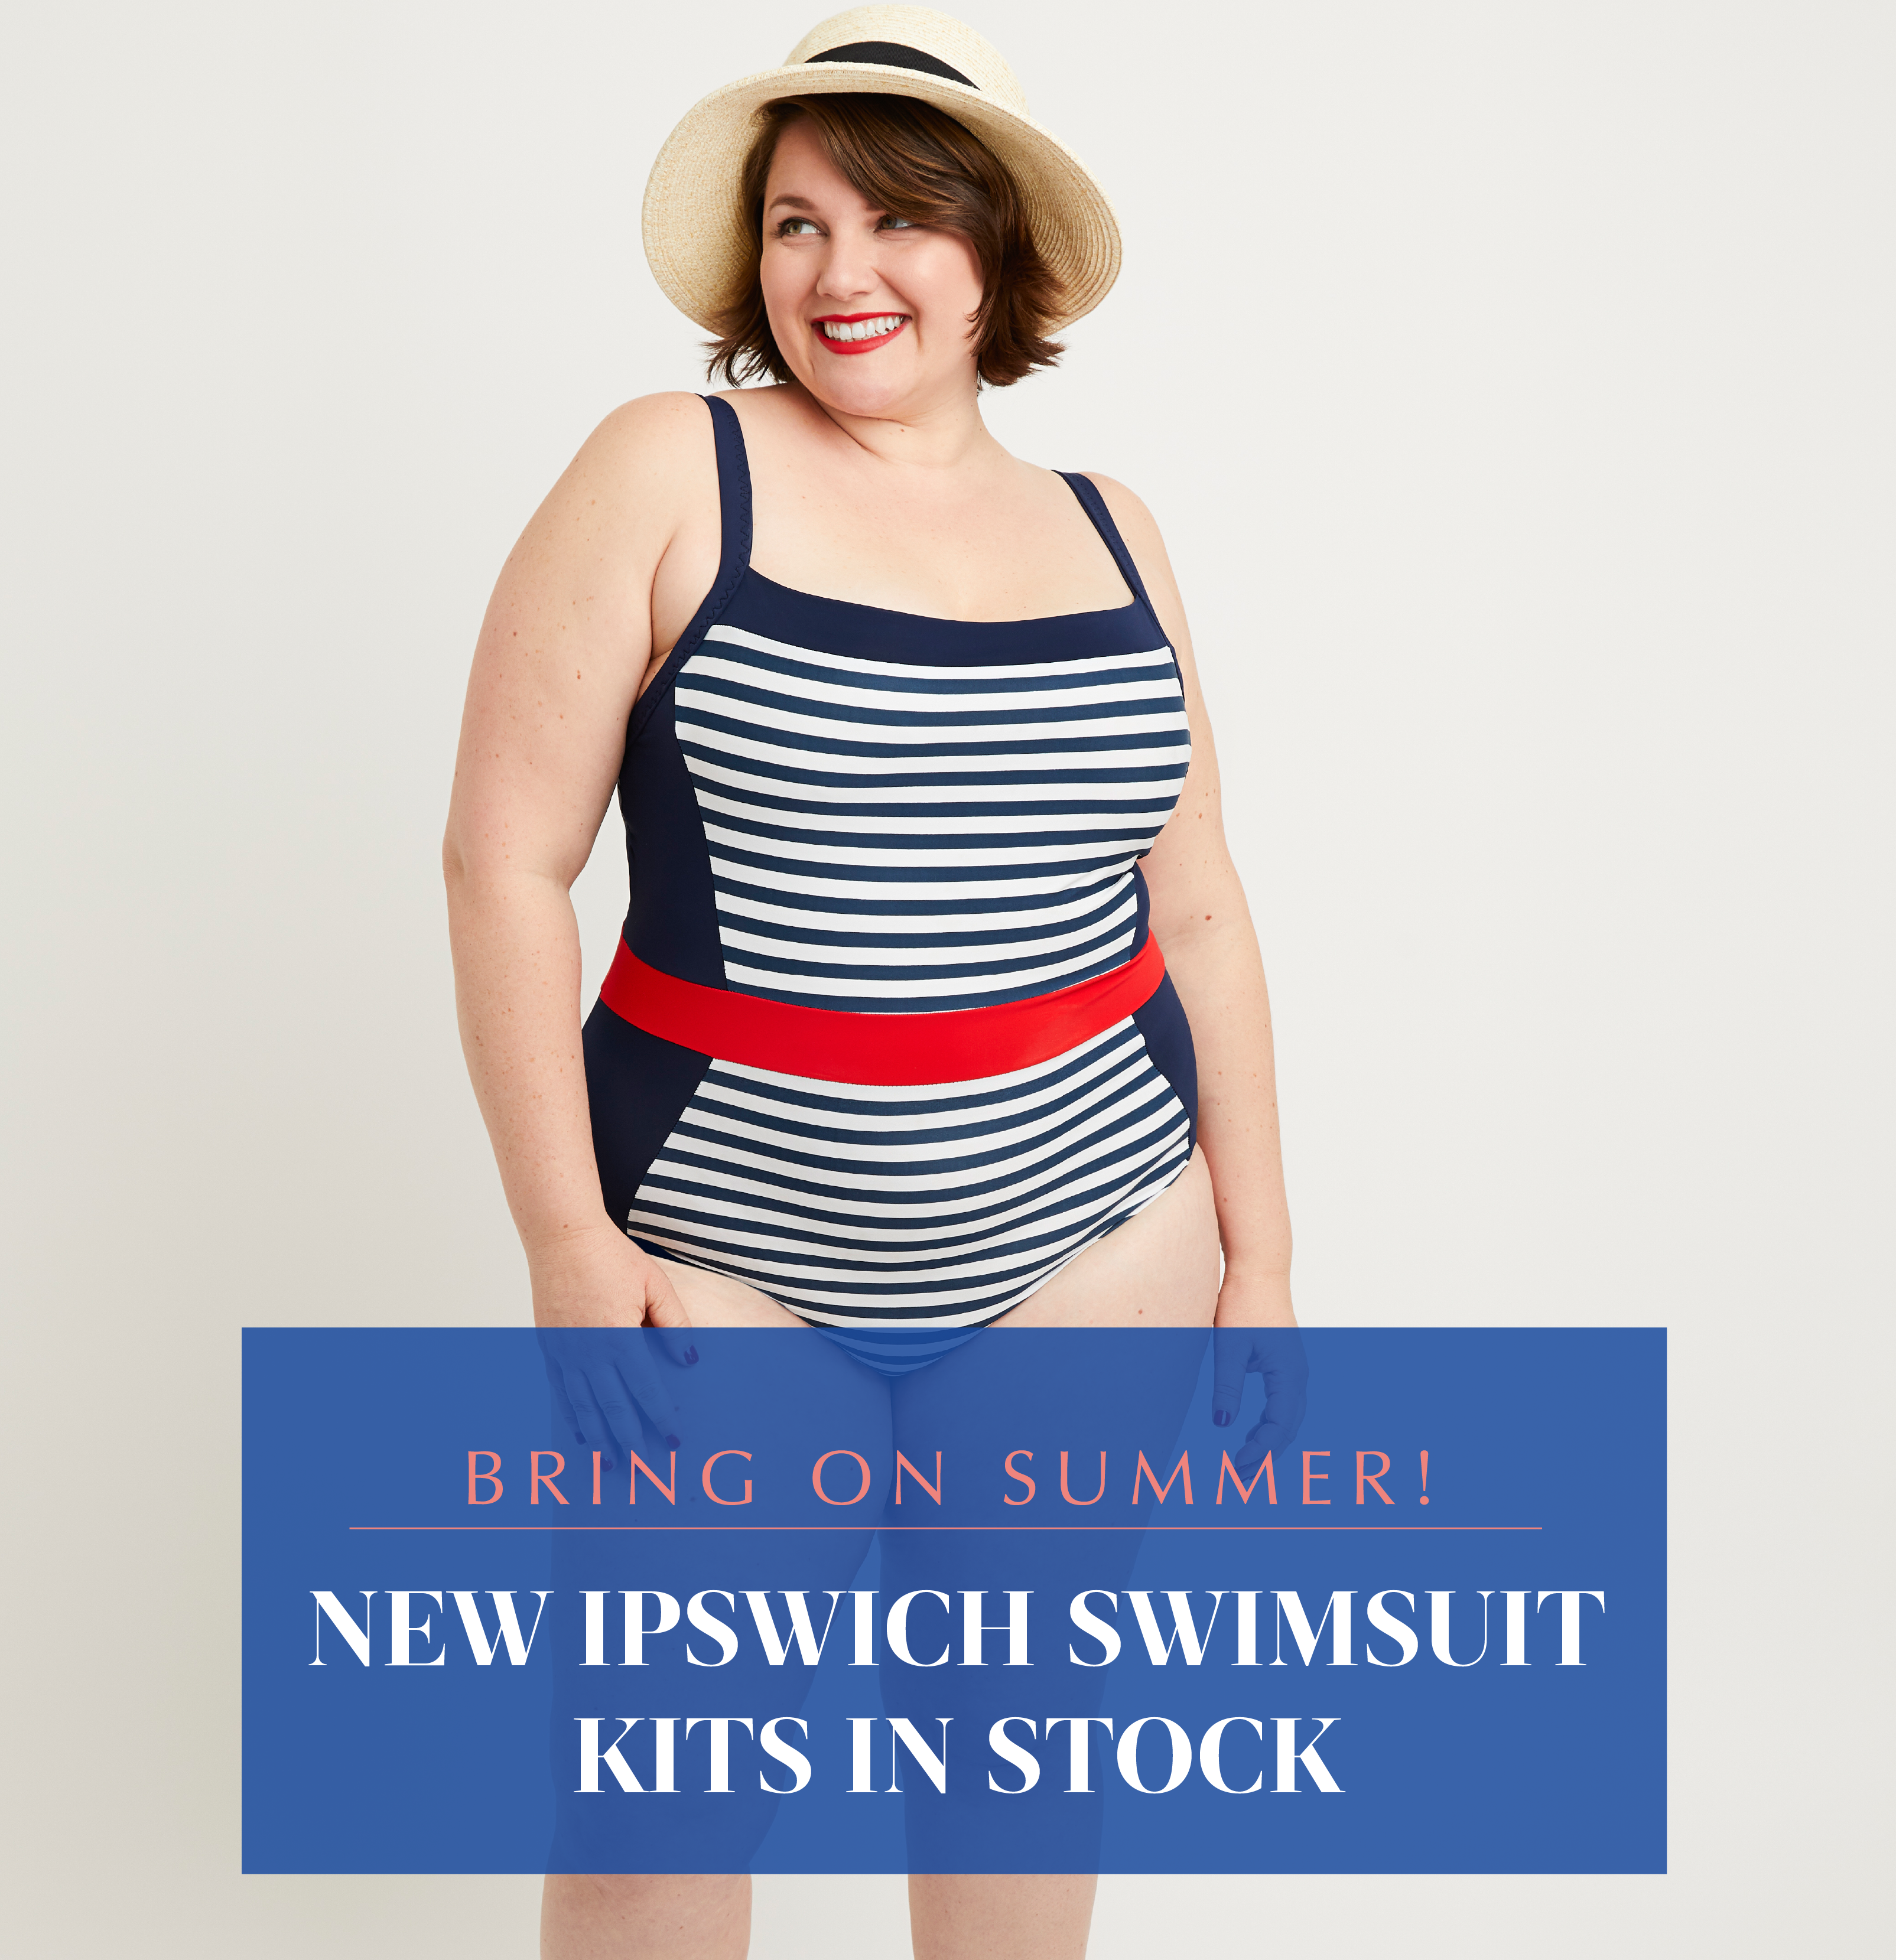 Ipswich Swimsuit in Sizes 12-32, and Introducing Cashmerette Swim Week!